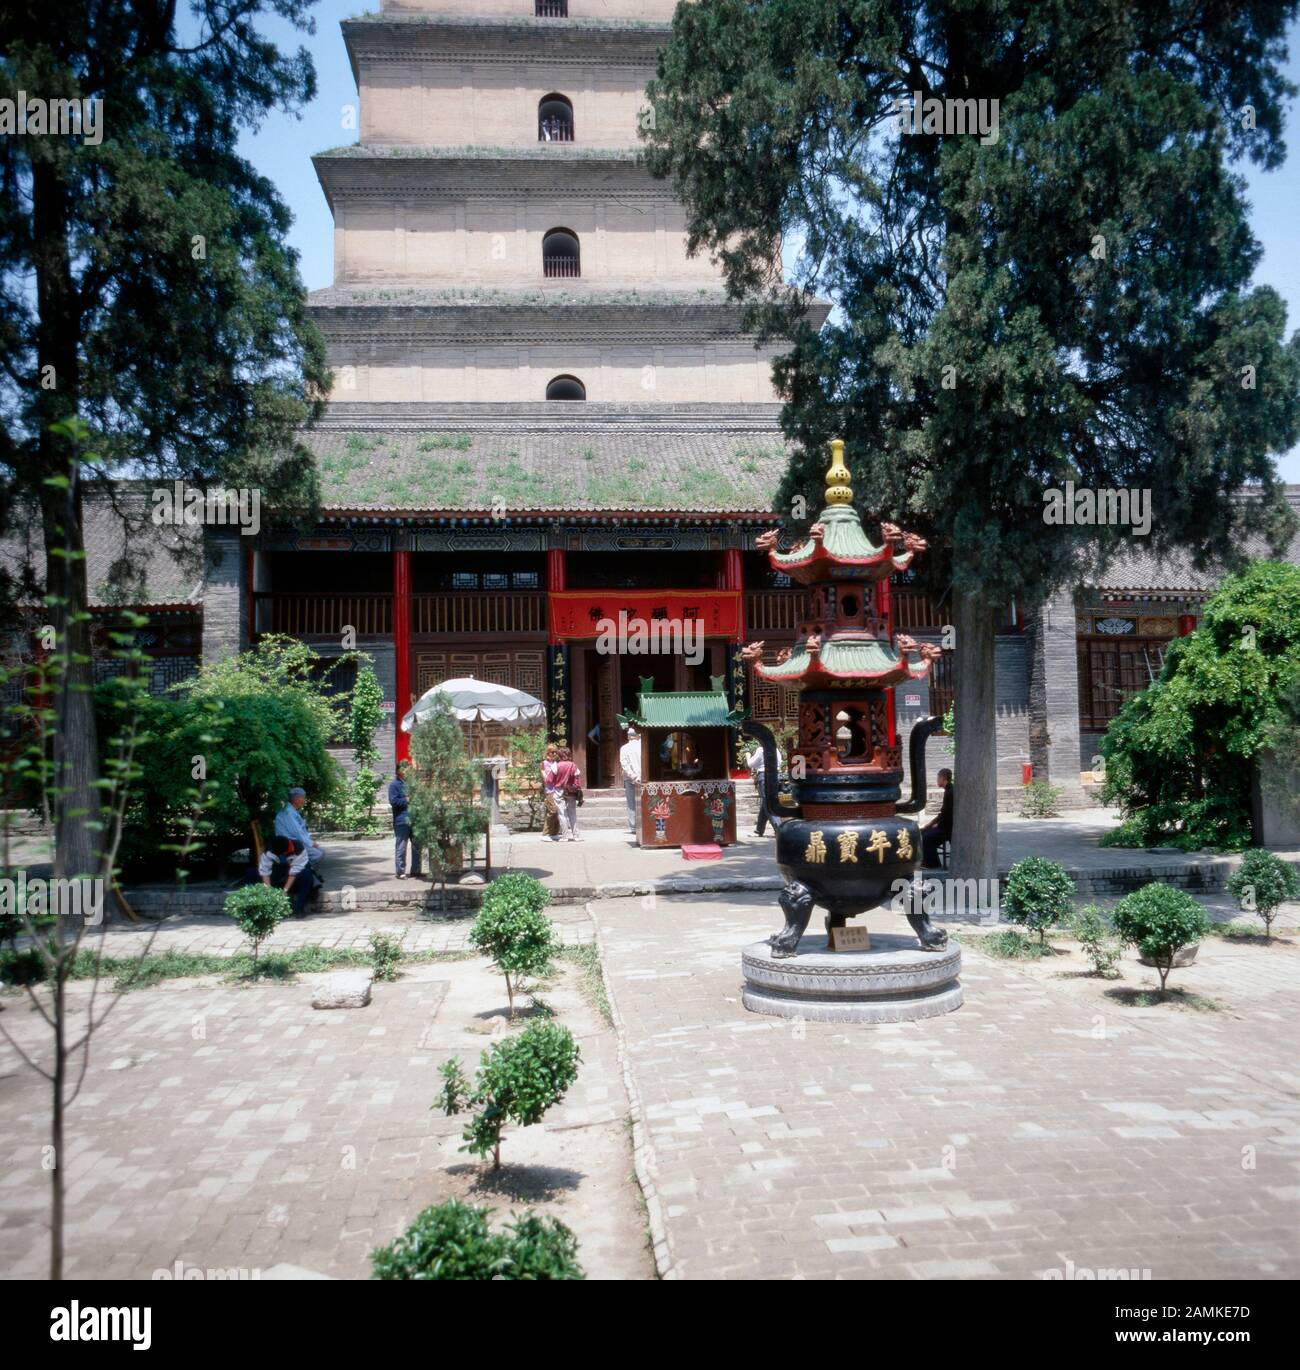 Vor der Großen Wildgans Pagode in der Stadt Xian, China 1980er Jahre. In front of the Giant Wild Goose Pagoda at the city of Xian, China 1980s. Stock Photo